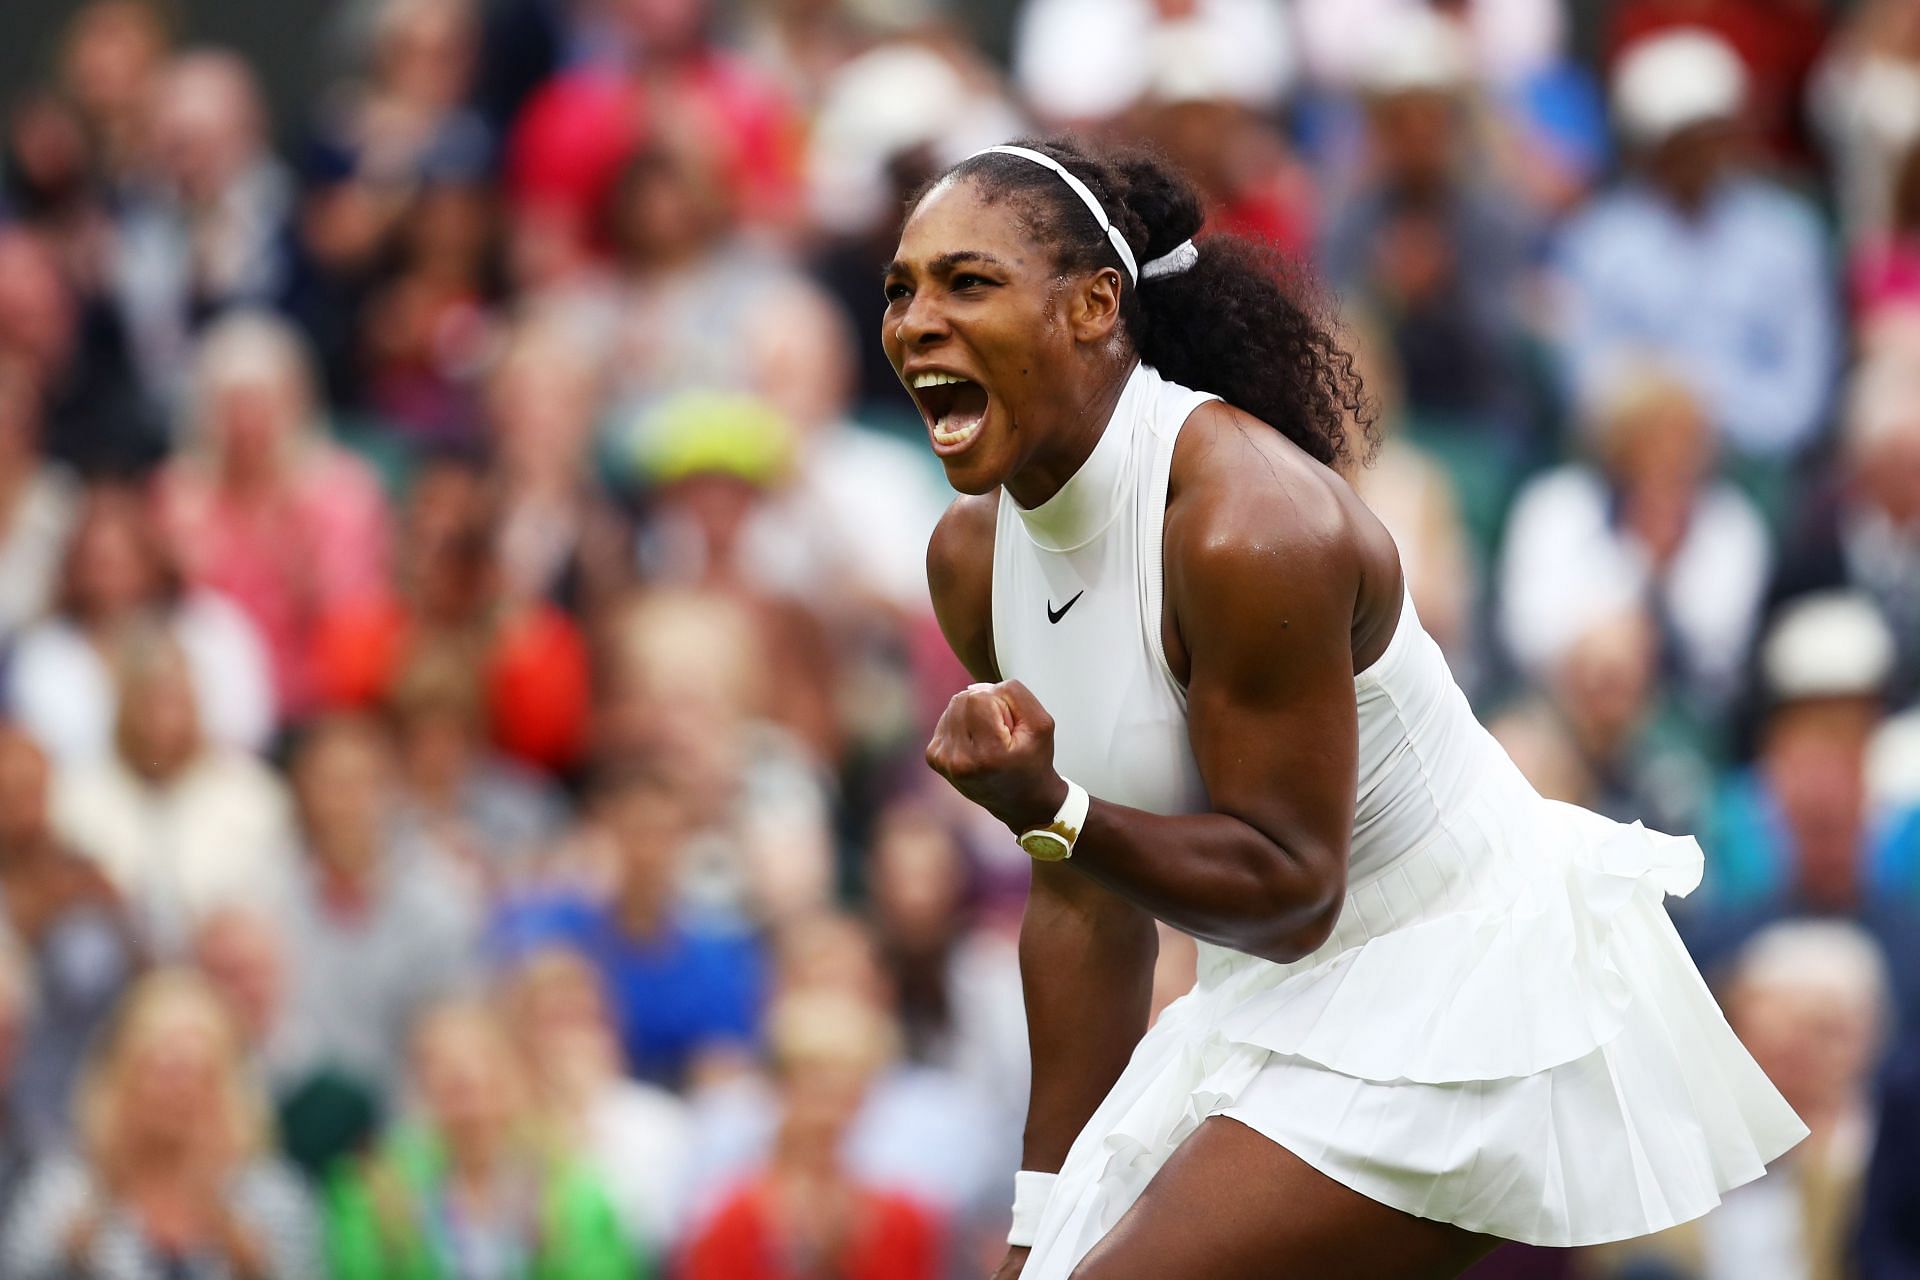 The proud winner of 23 Grand Slams, Serena Williams reckons she should have won even more